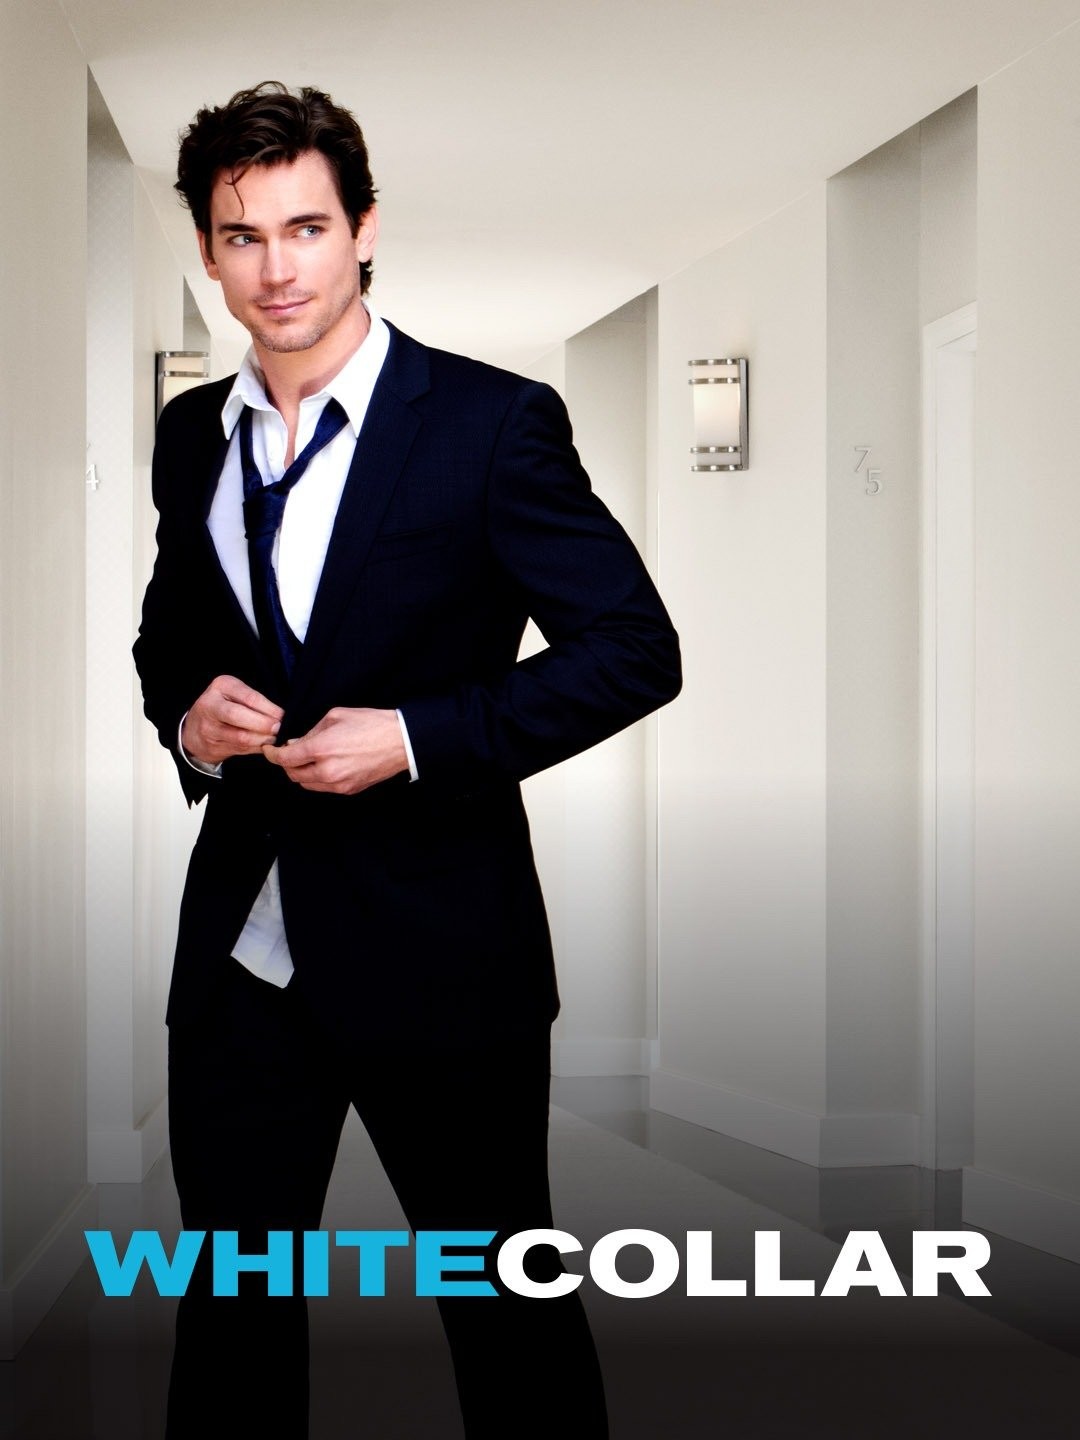 Neal Caffrey - White Collar, Dedicated to the AMAZING SHOW:…